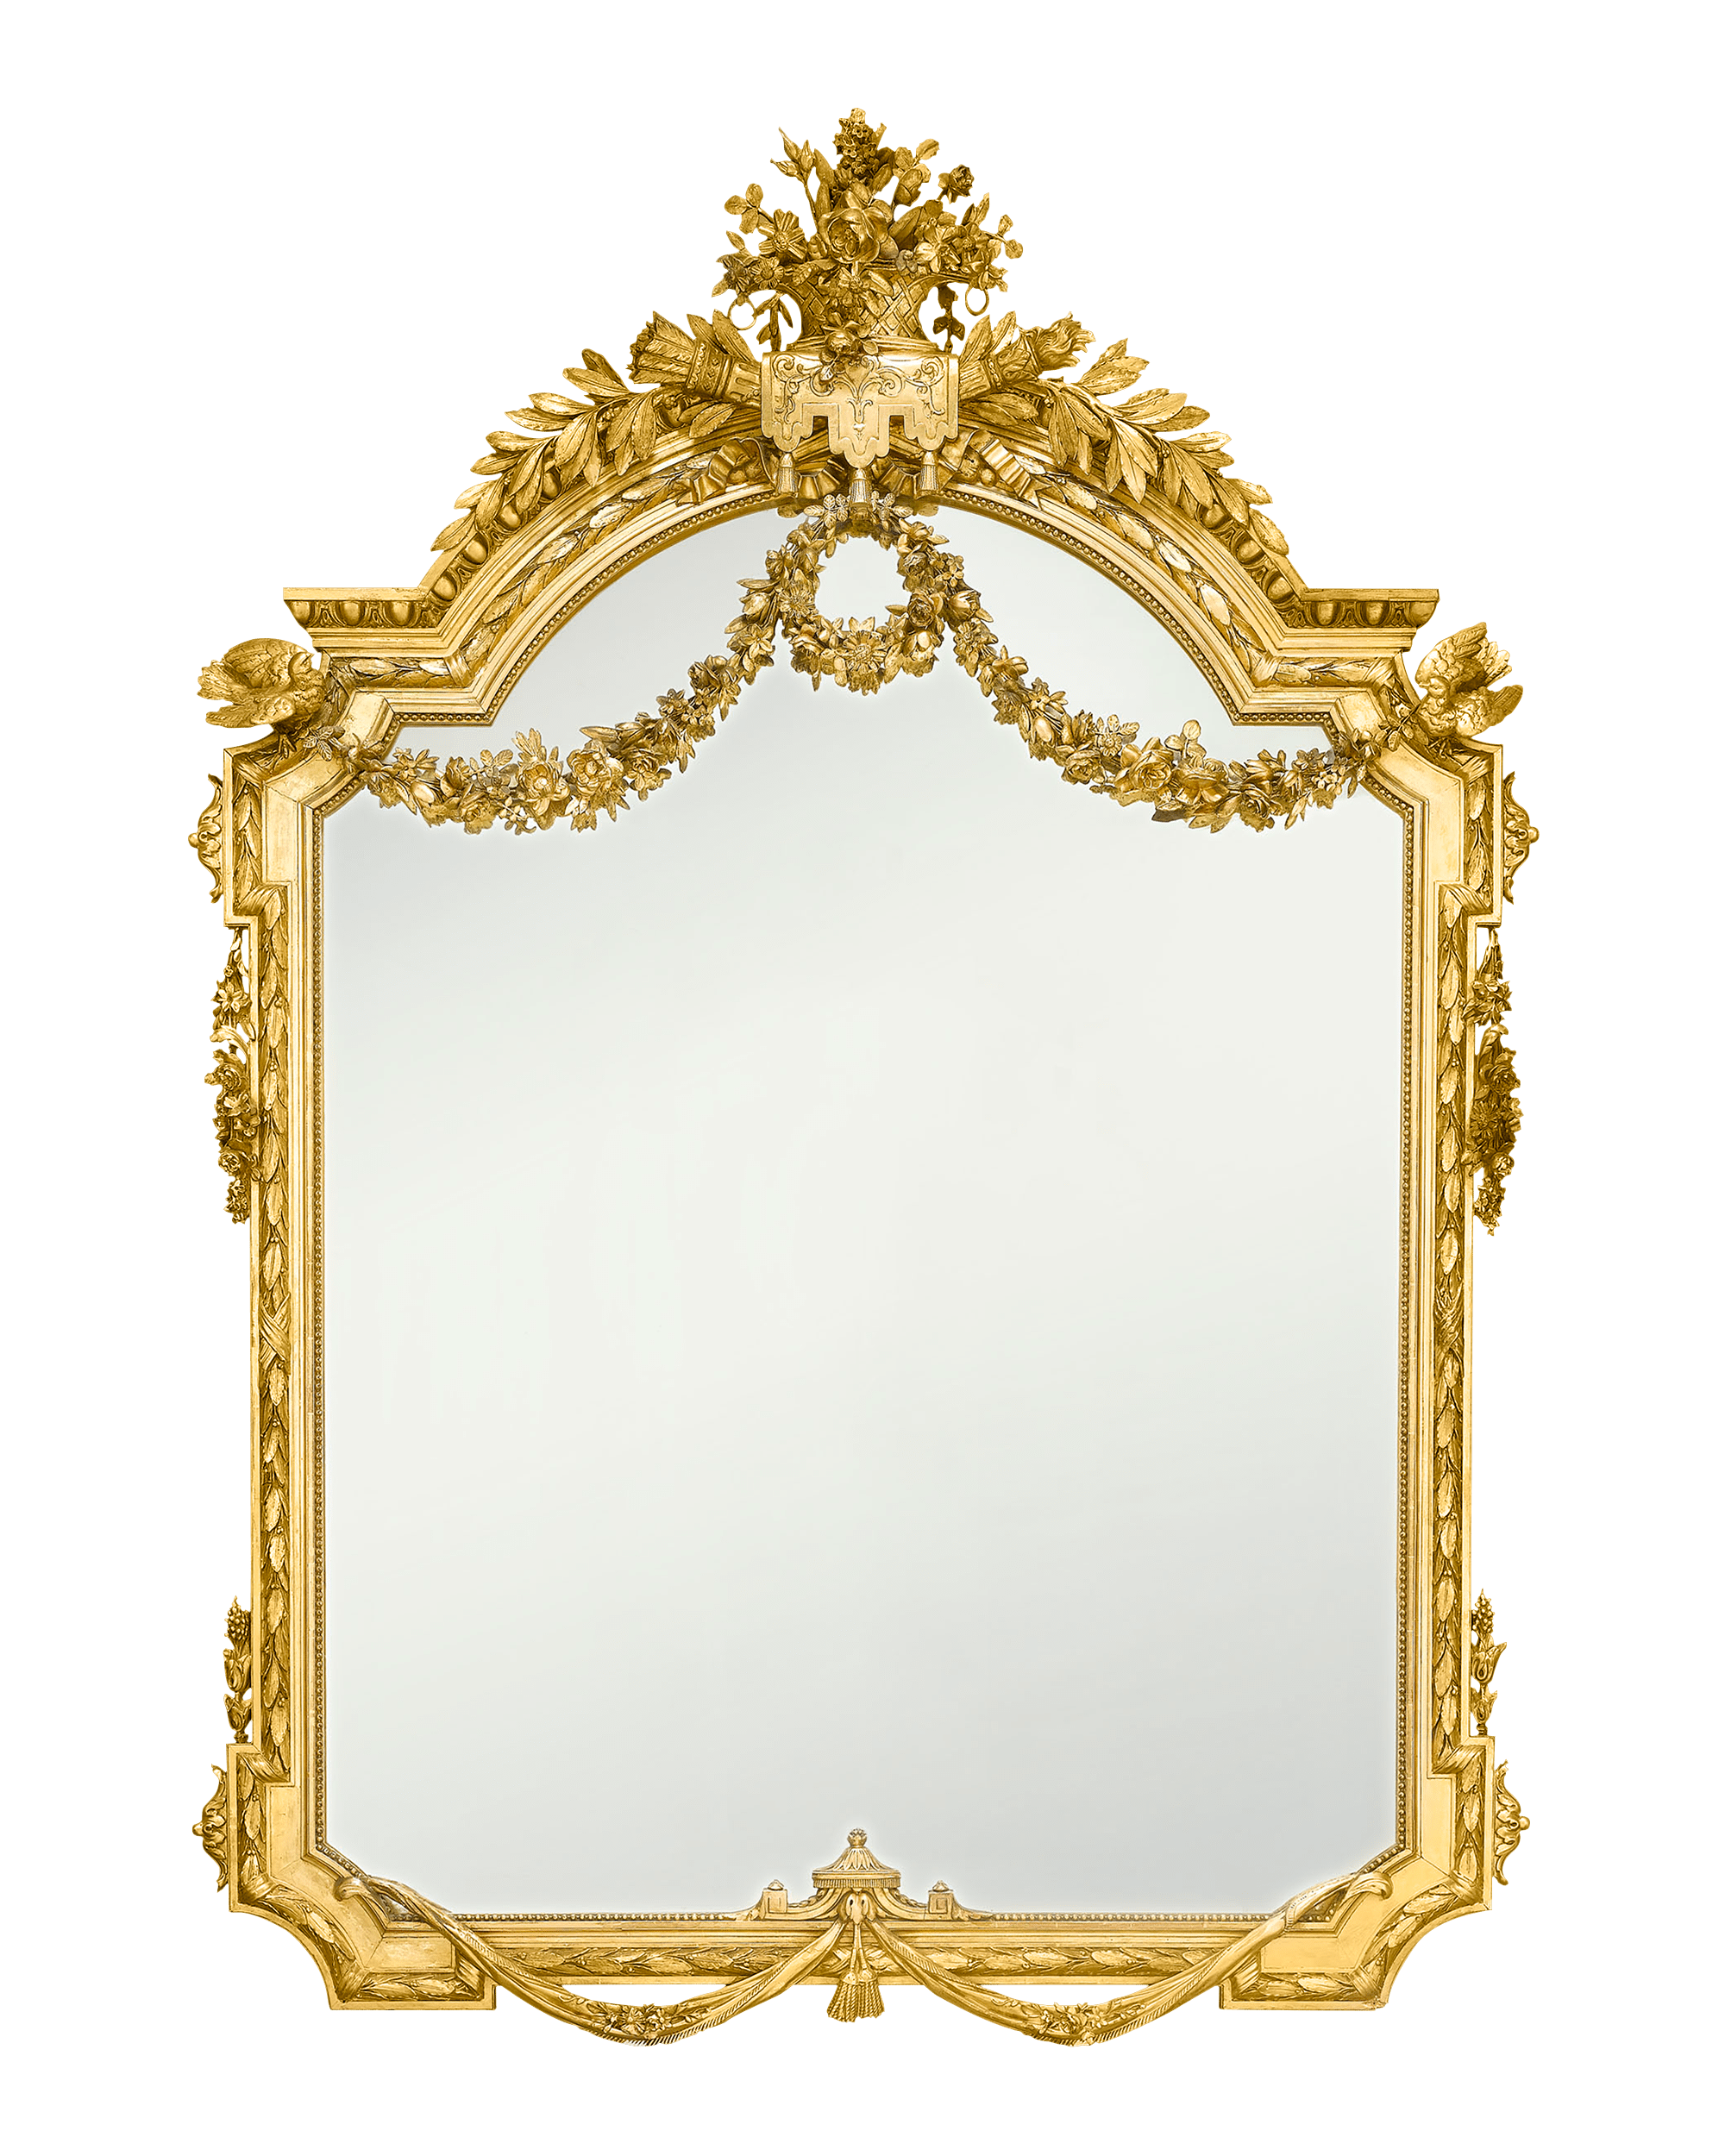 This Napoleon III mirror is an exceptional example of Second Empire grandeur